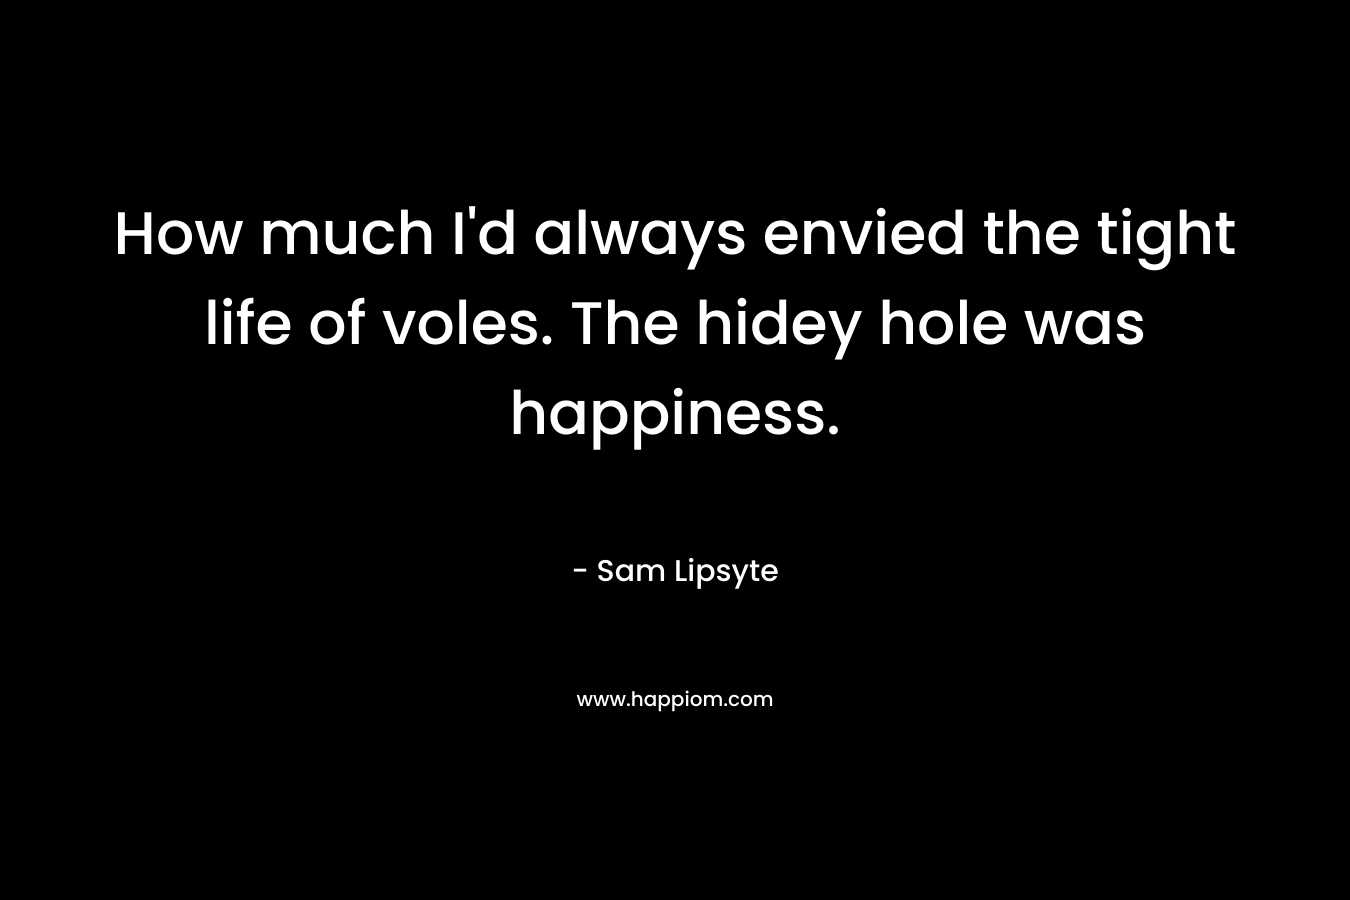 How much I’d always envied the tight life of voles. The hidey hole was happiness. – Sam Lipsyte